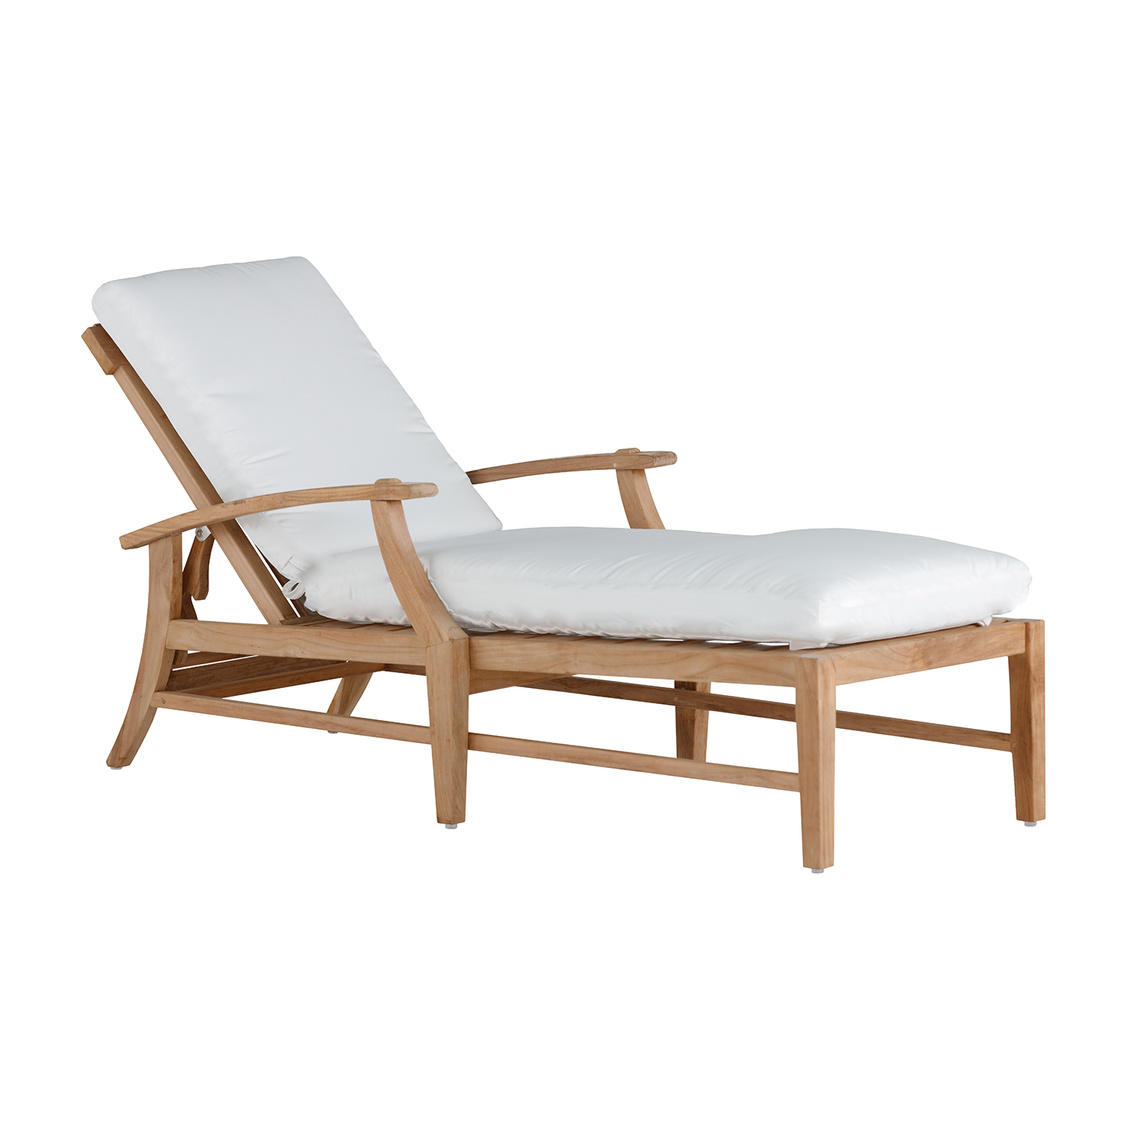 croquet chaise lounge without wheel in natural teak – frame only product image